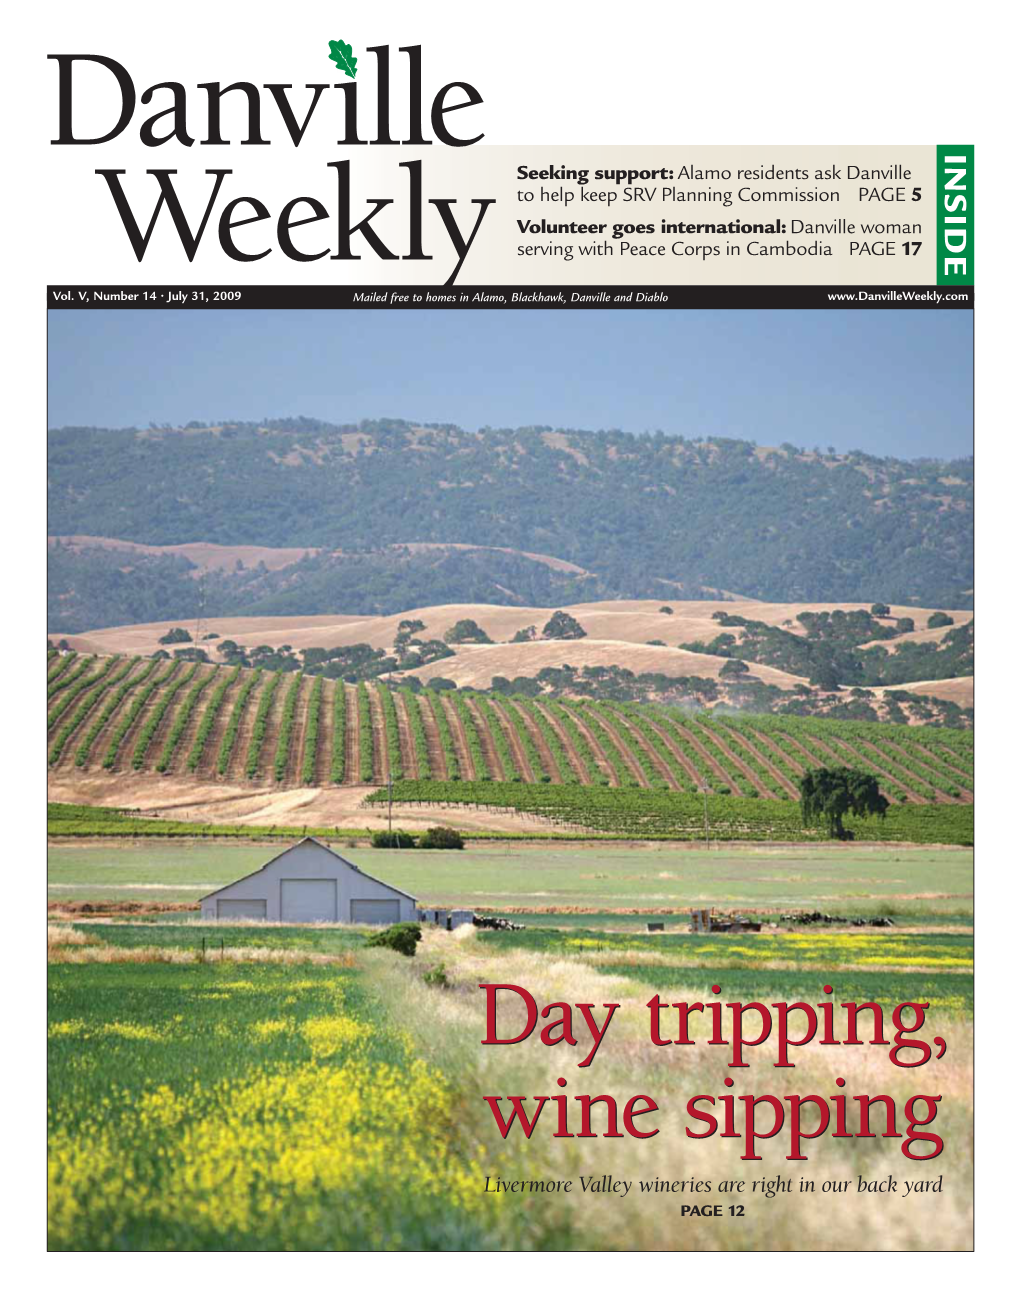 Livermore Valley Wineries Are Right in Our Back Yard PAGE 12 PARADISE RESTAURANT